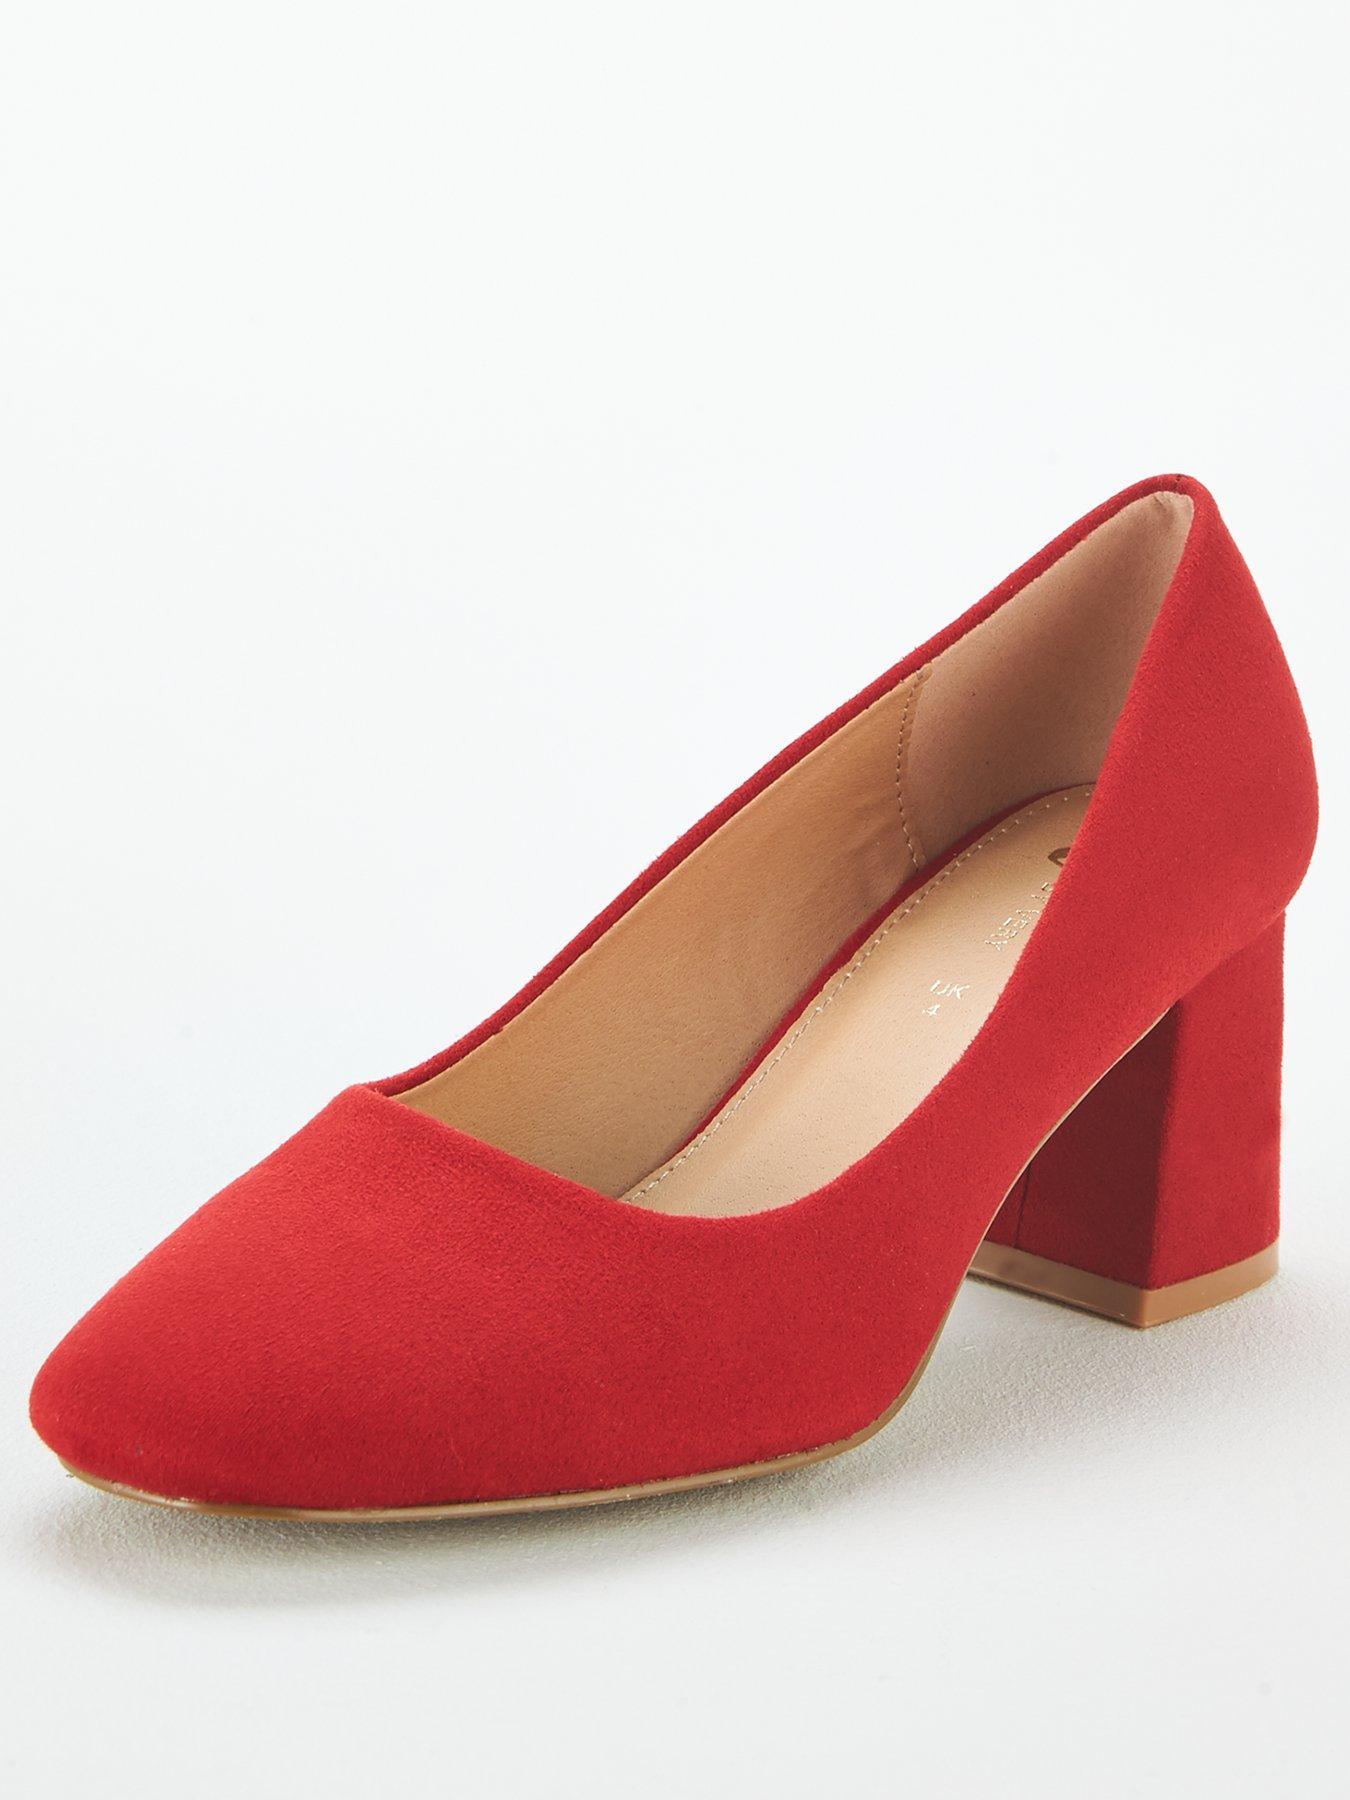 red court shoes ireland